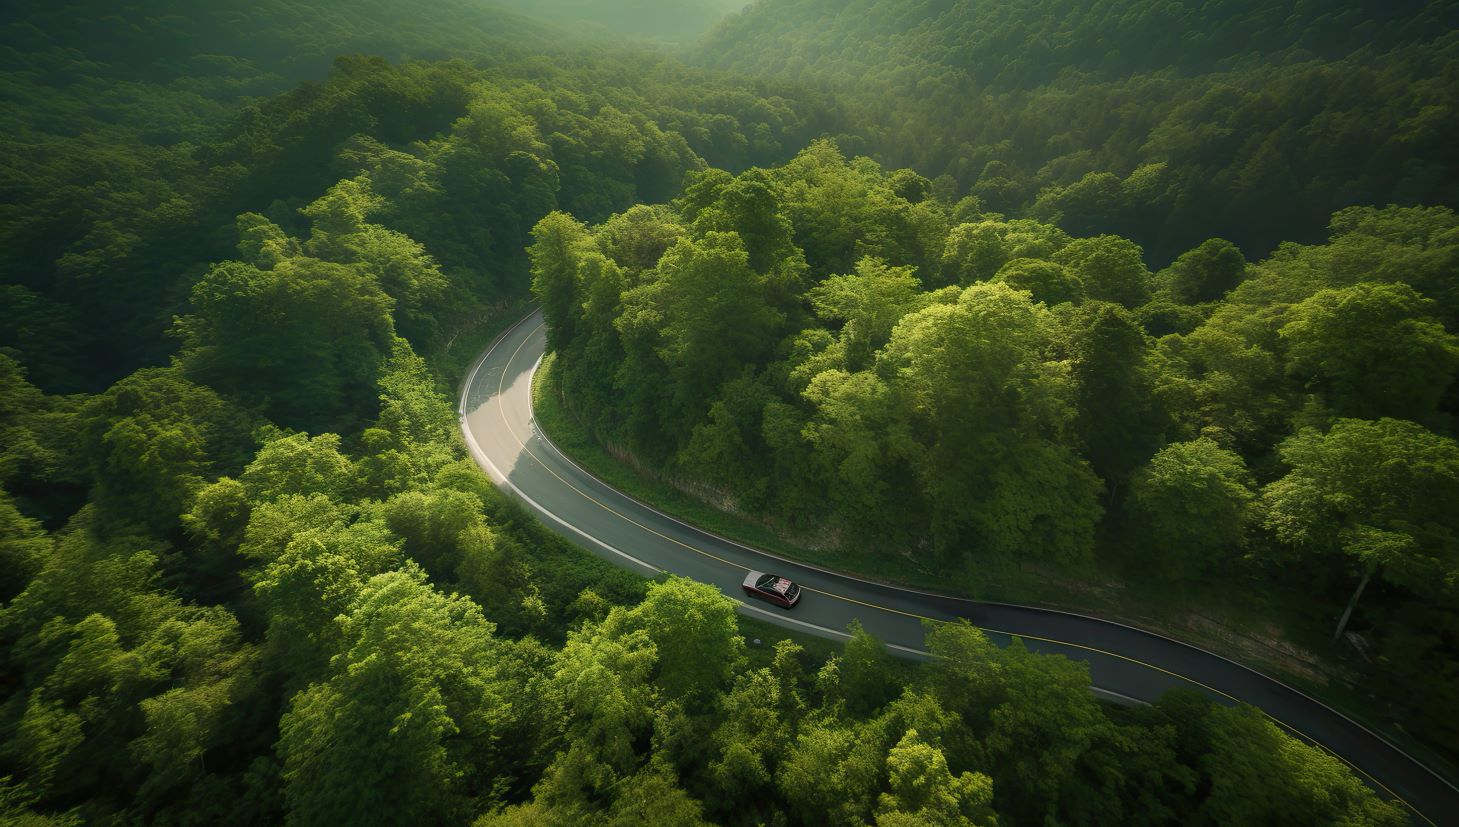 Travel the Hocking Hills Scenic Byway